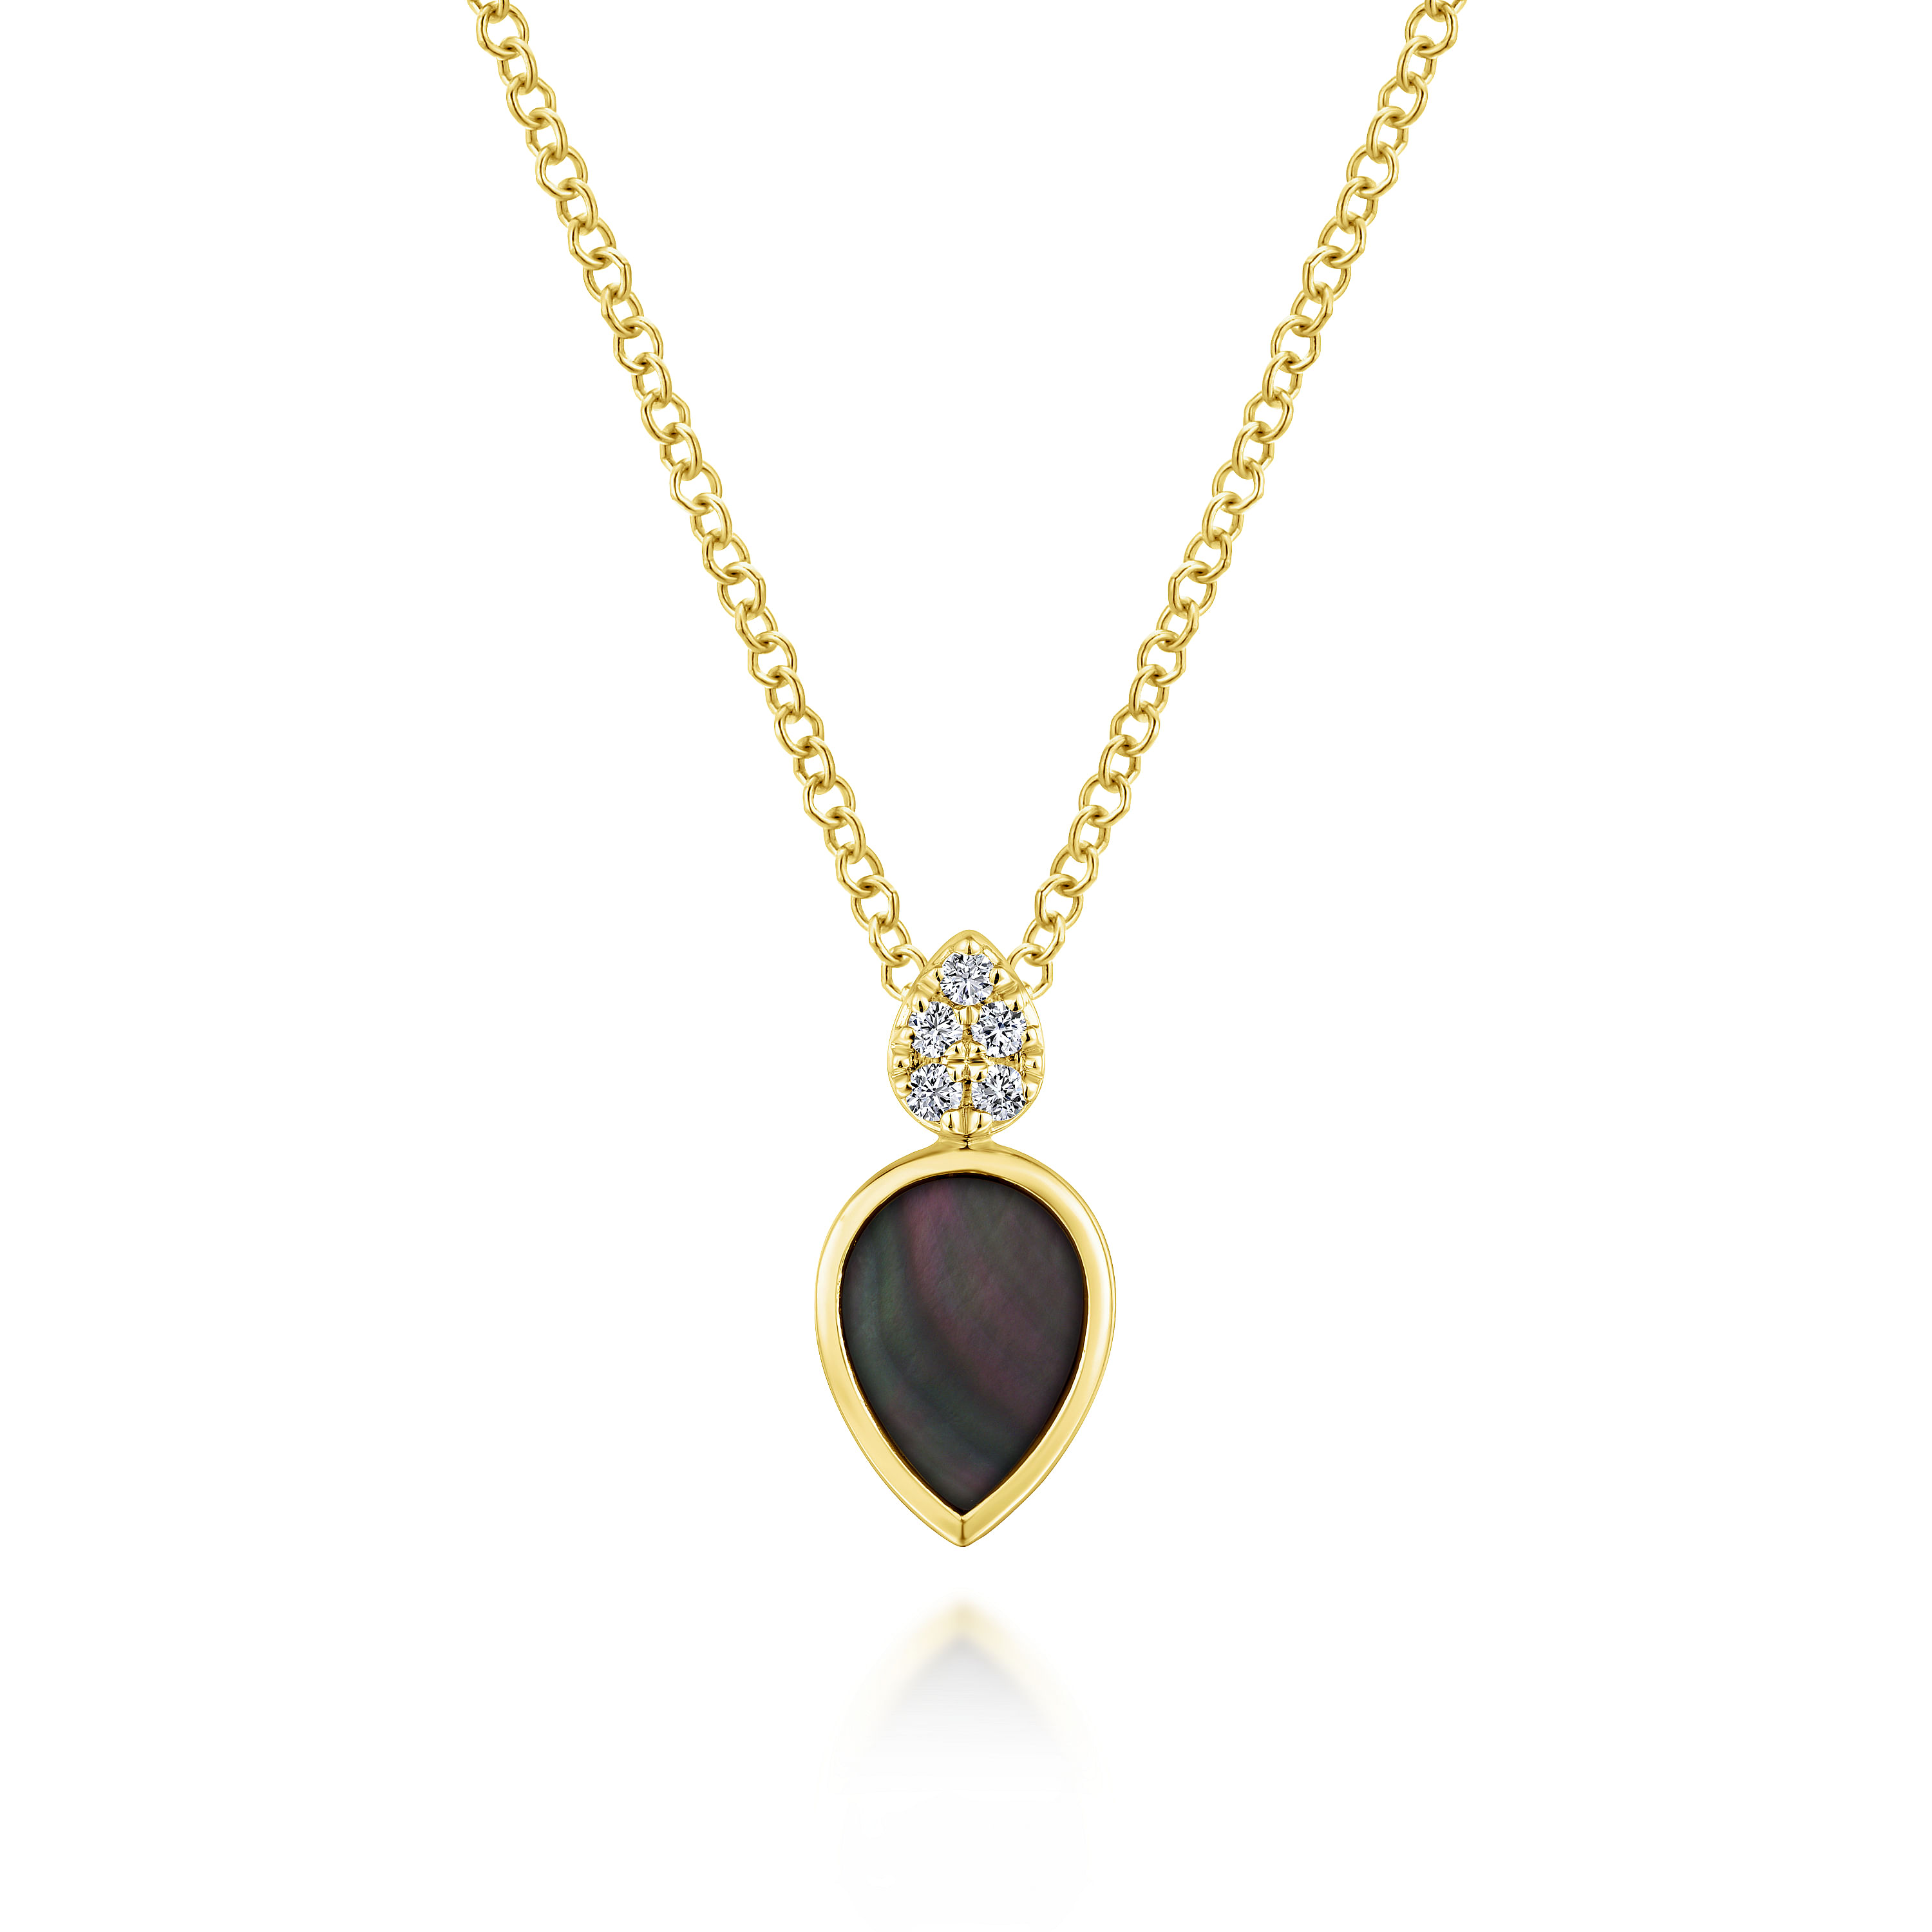 14K Yellow Gold Pear Shaped Black Mother Of Pearl and Diamond Pendant Necklace